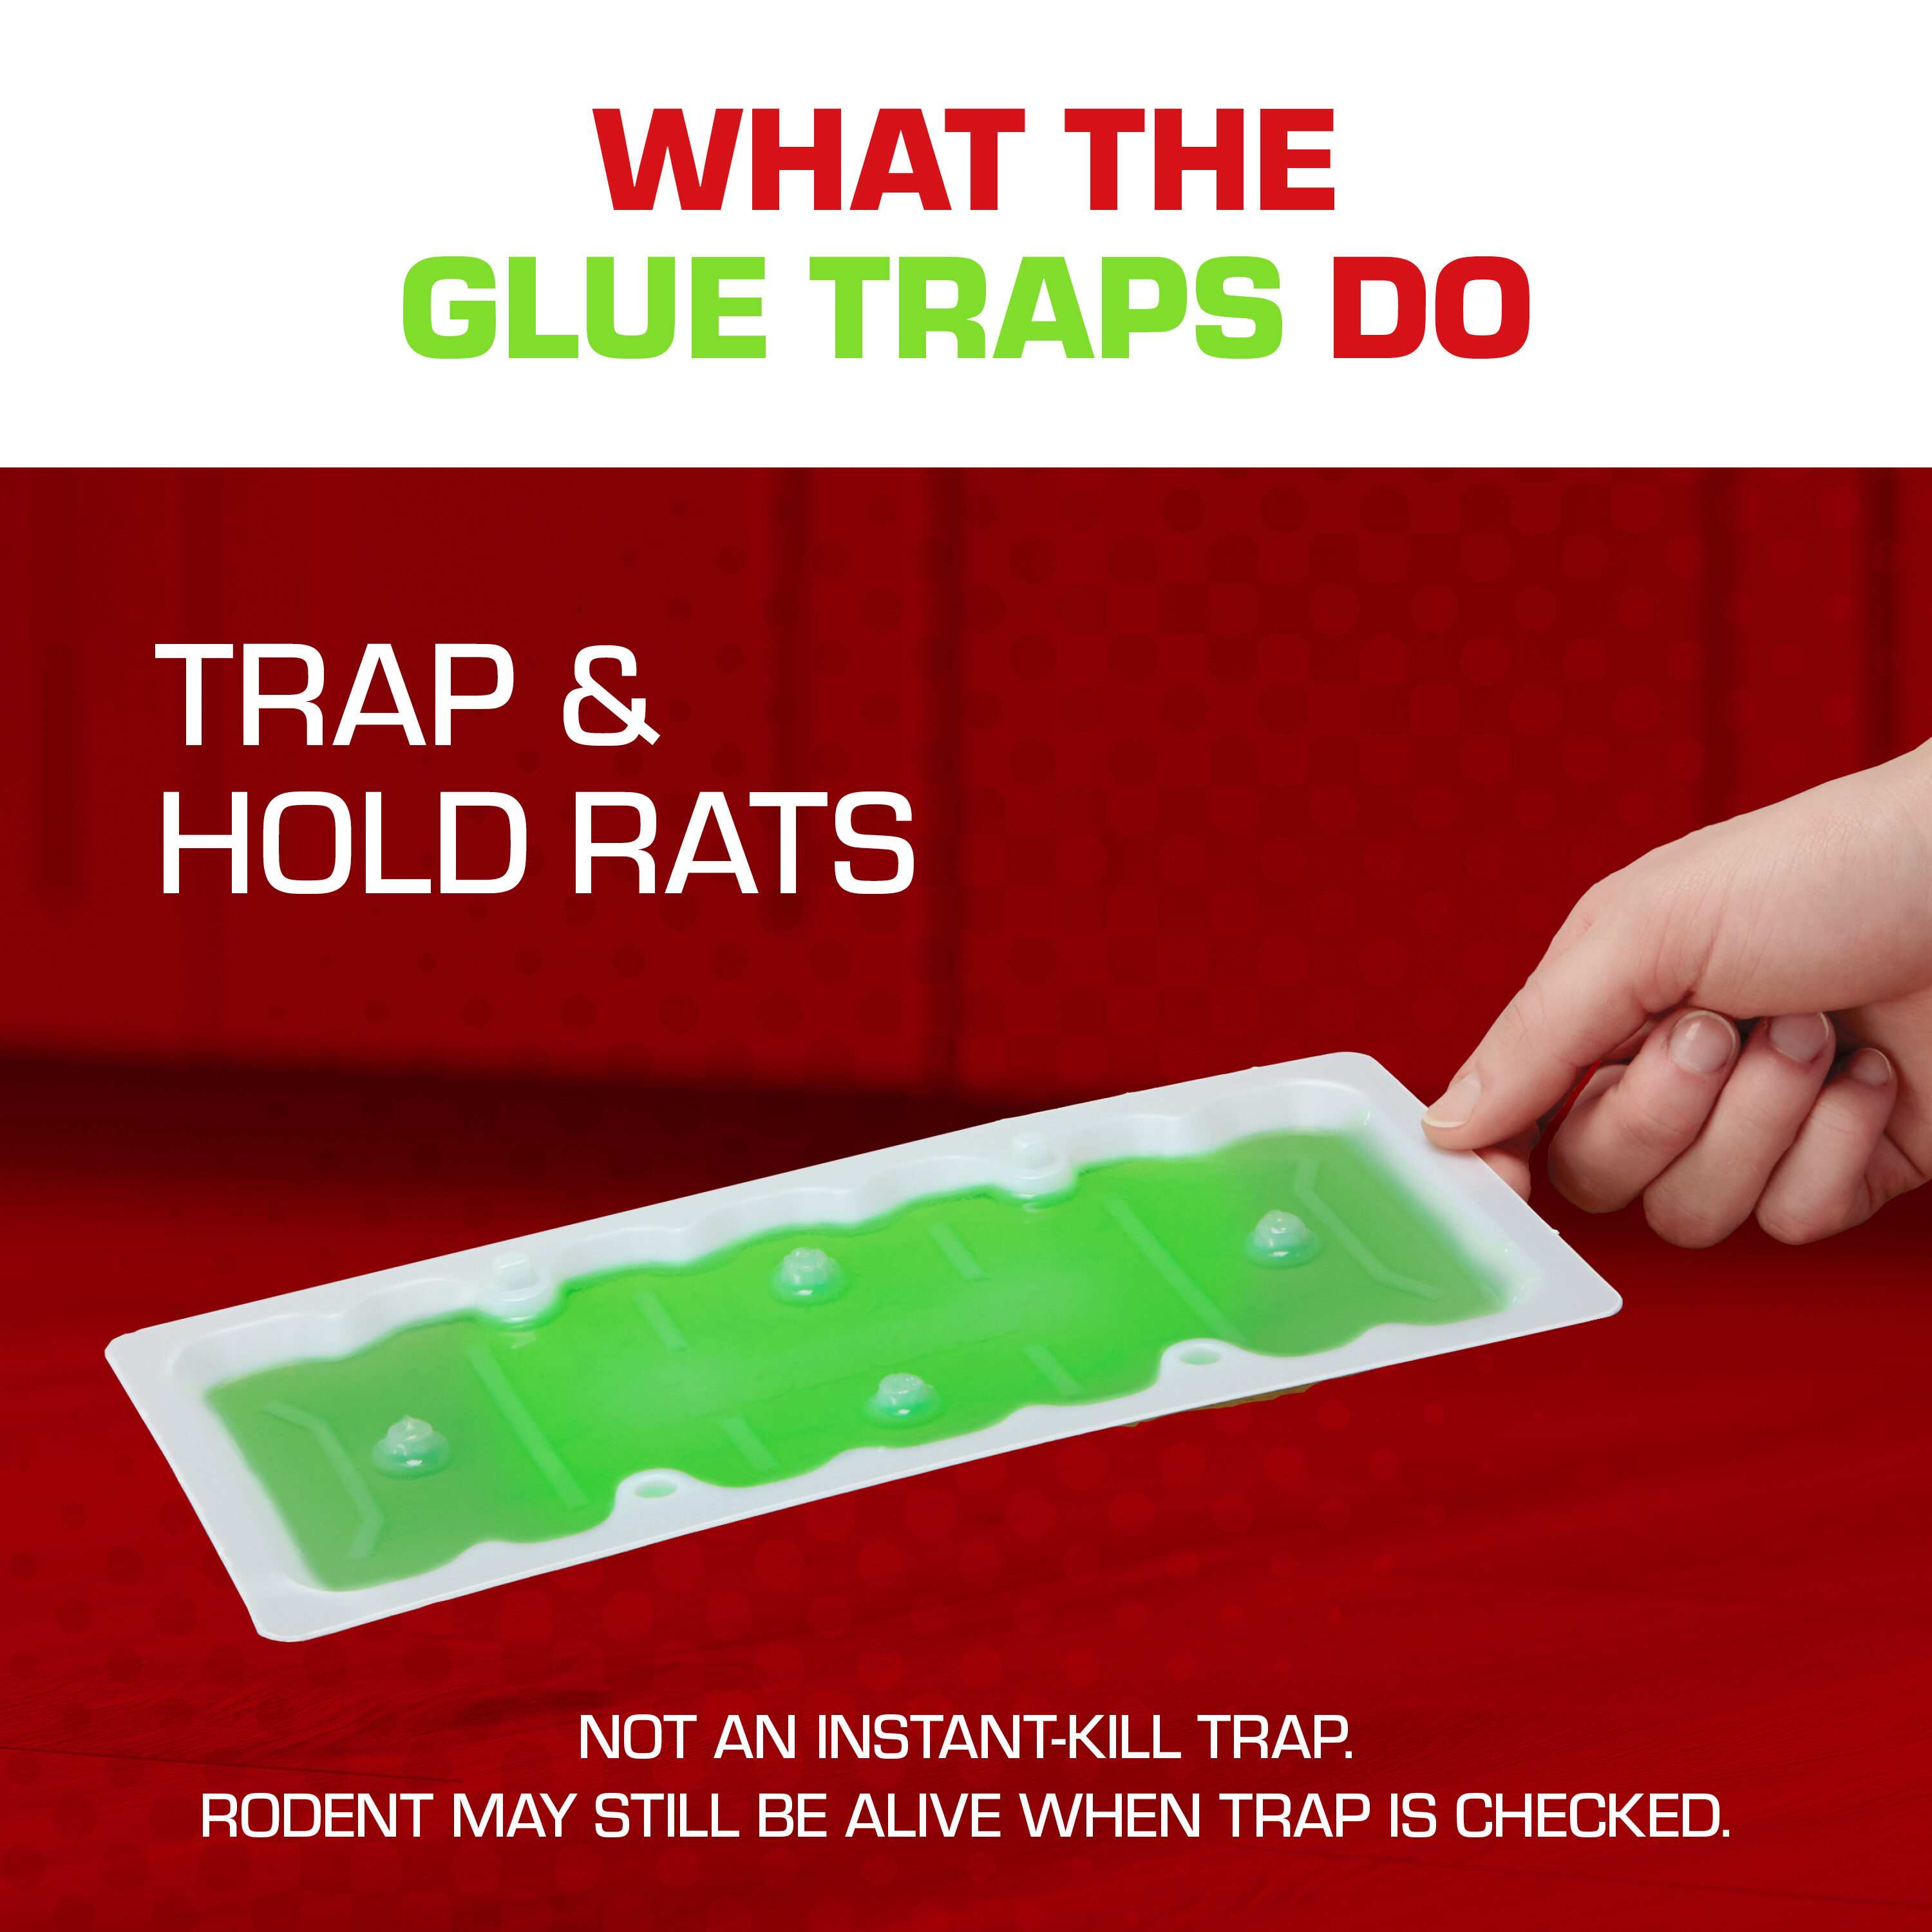 Sticky Mouse Trap Mouse Traps Indoor For Home Rat Traps That Work For  Trapping Snakes Rats Spiders Roaches Rodents Black